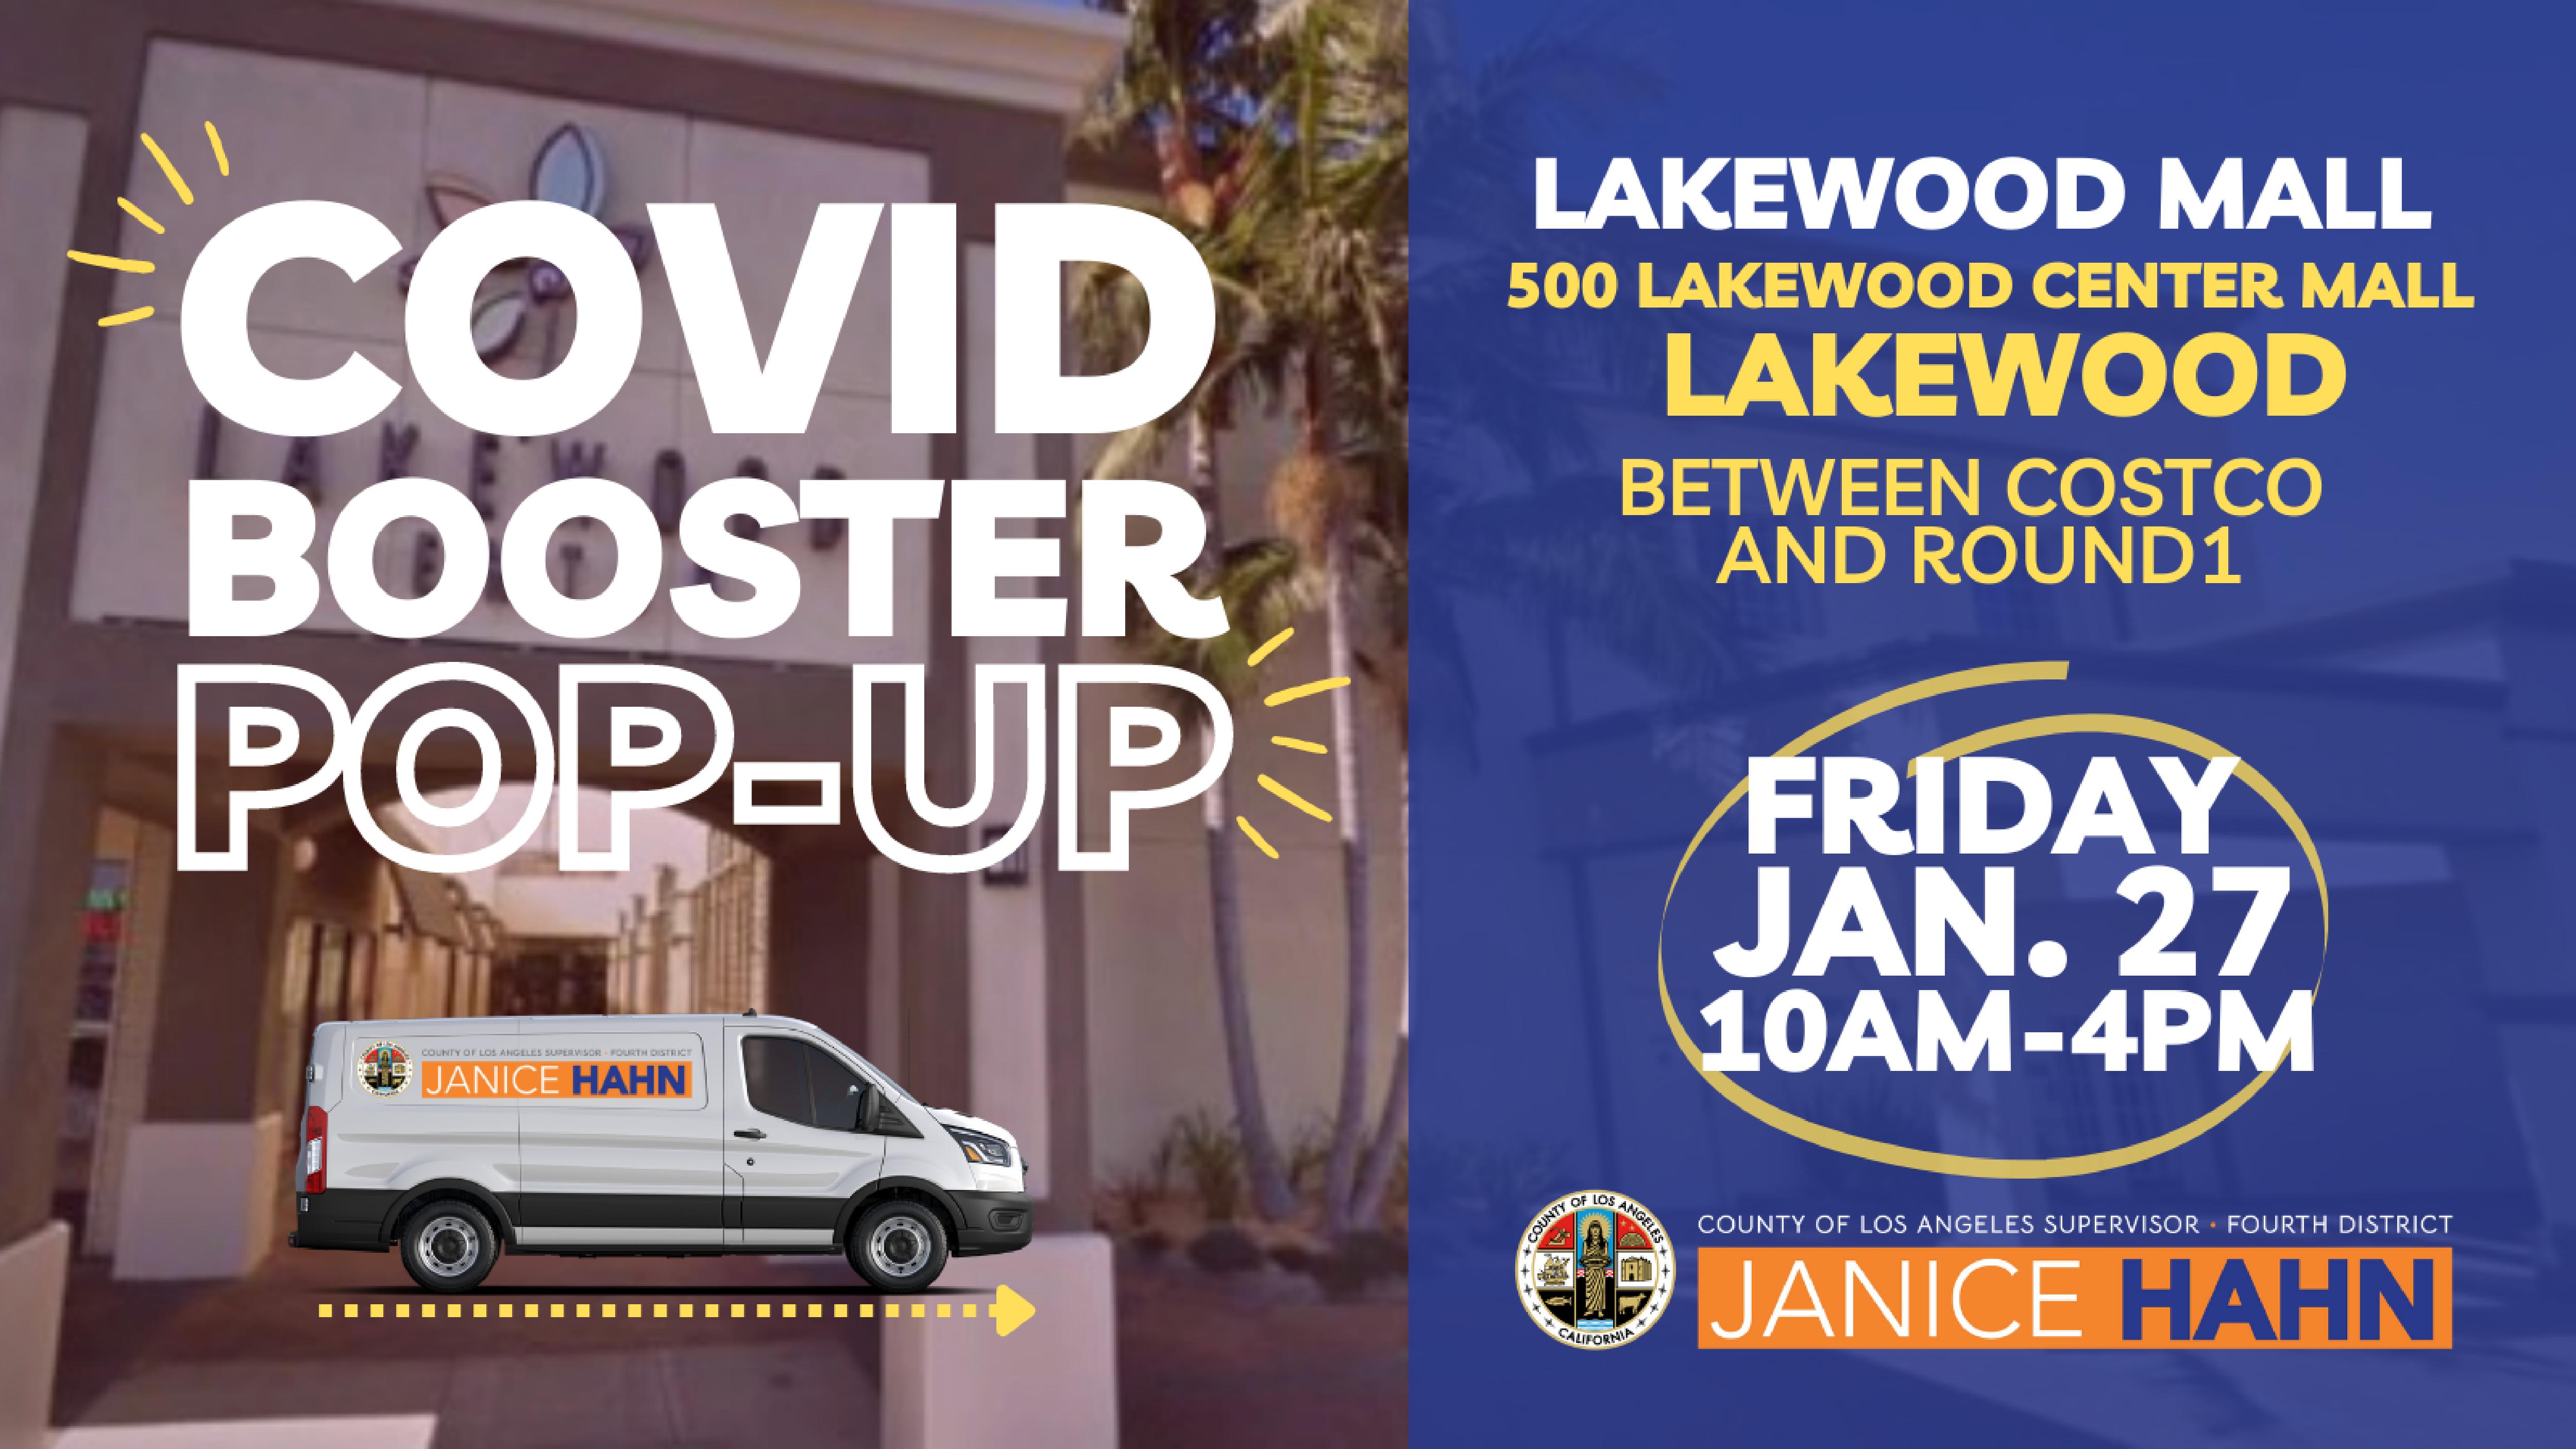 Covid Booster Pop-Up 
Lakewood Mall
500 Lakewood Center Mall
Lakewood 
Between Costco and Round1
Friday Jan. 27 10AM - 4PM
Janice Hahn
White van in front of Lakewood center entrance 